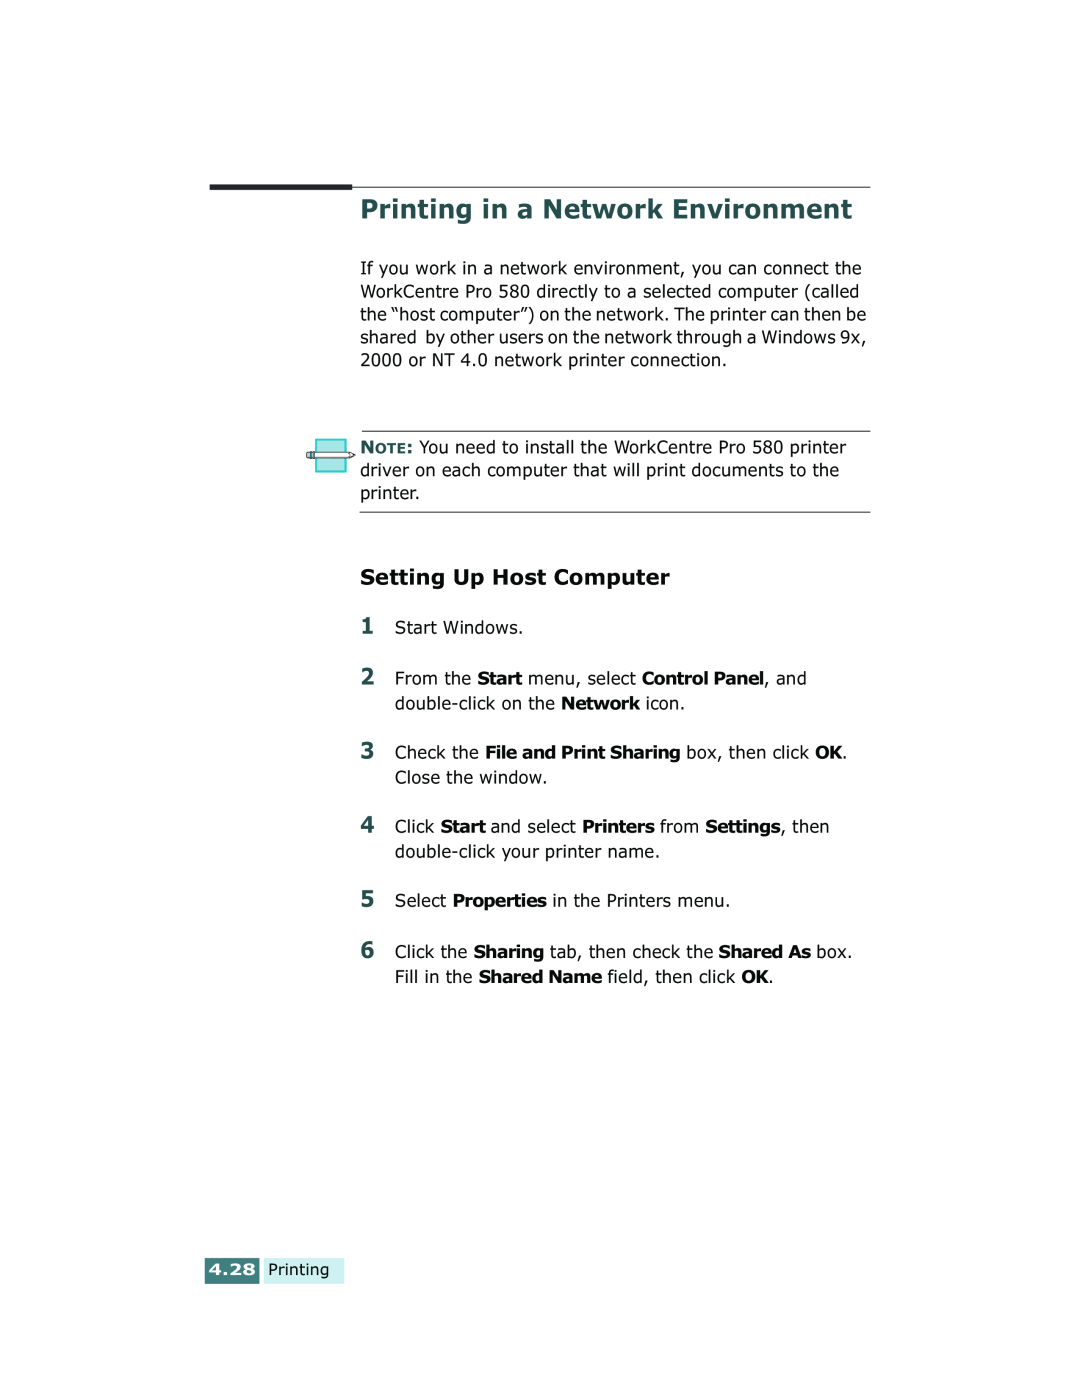 Xerox Pro 580 manual Printing in a Network Environment, Setting Up Host Computer 